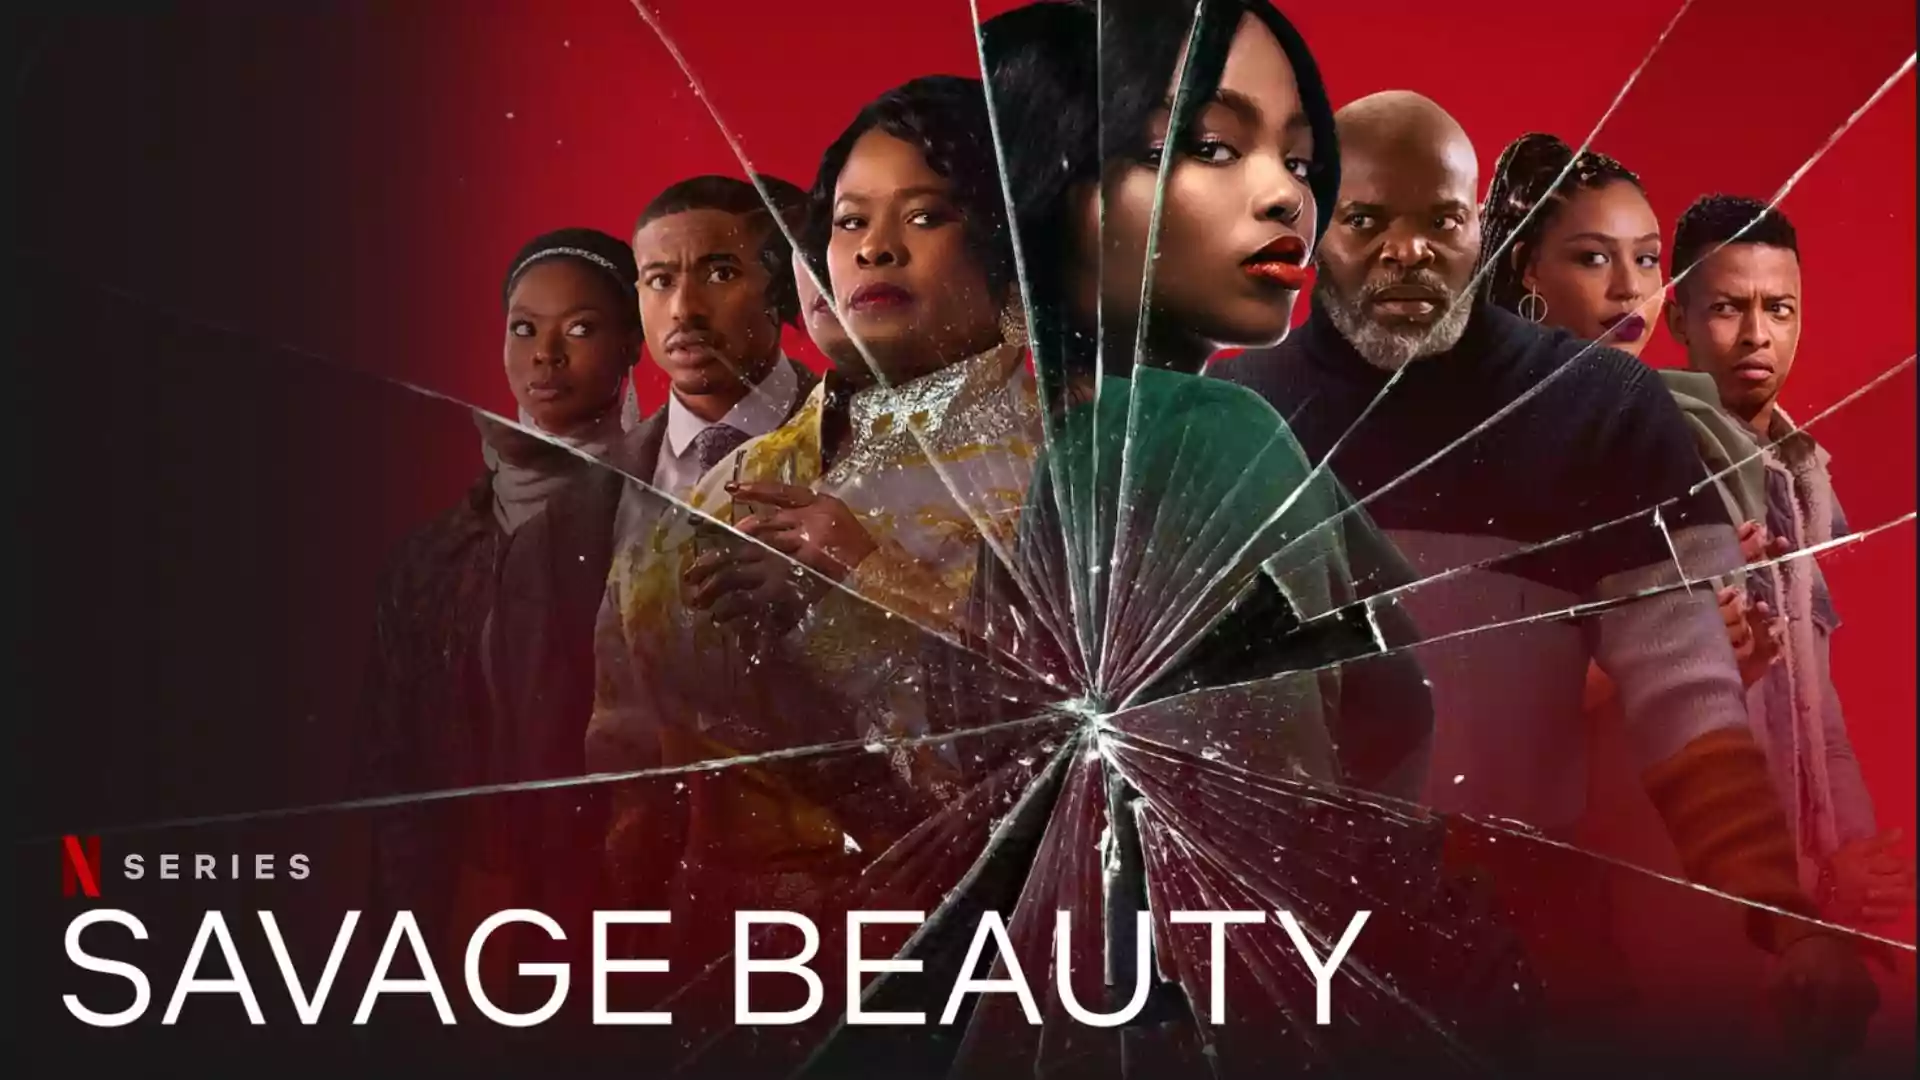 Savage Beauty Parents Guide. Savage Beauty Age Rating. 2022 Netflix series Savage Beauty release date, cast, storyline, trailer and images.